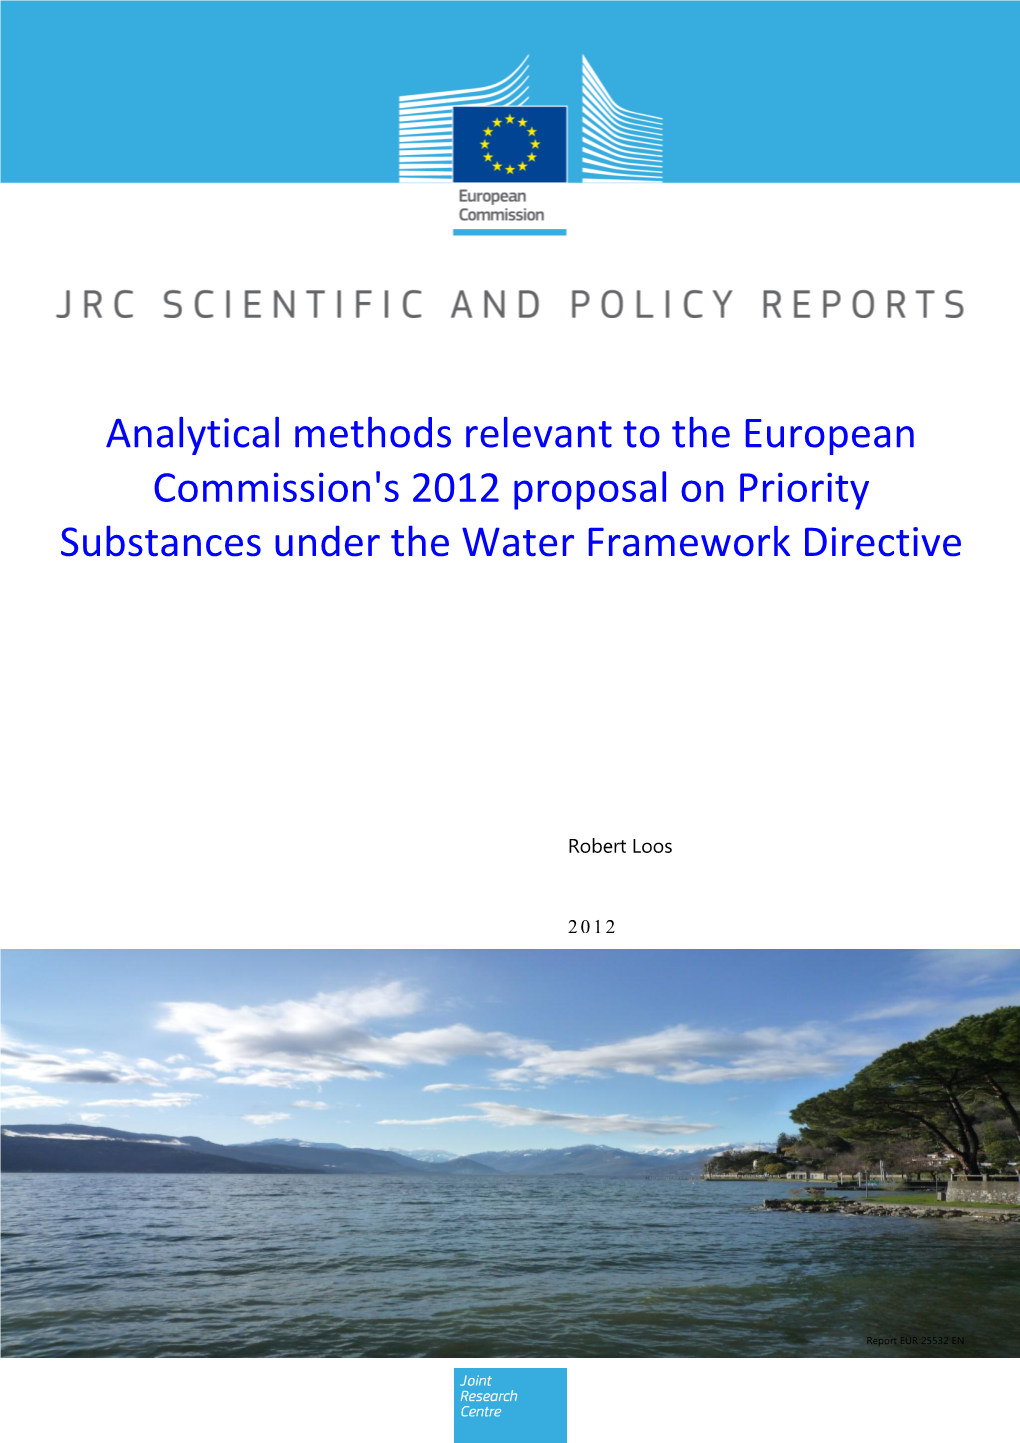 Analytical Methods Relevant to the European Commission's 2012 Proposal on Priority Substances Under the Water Framework Directive